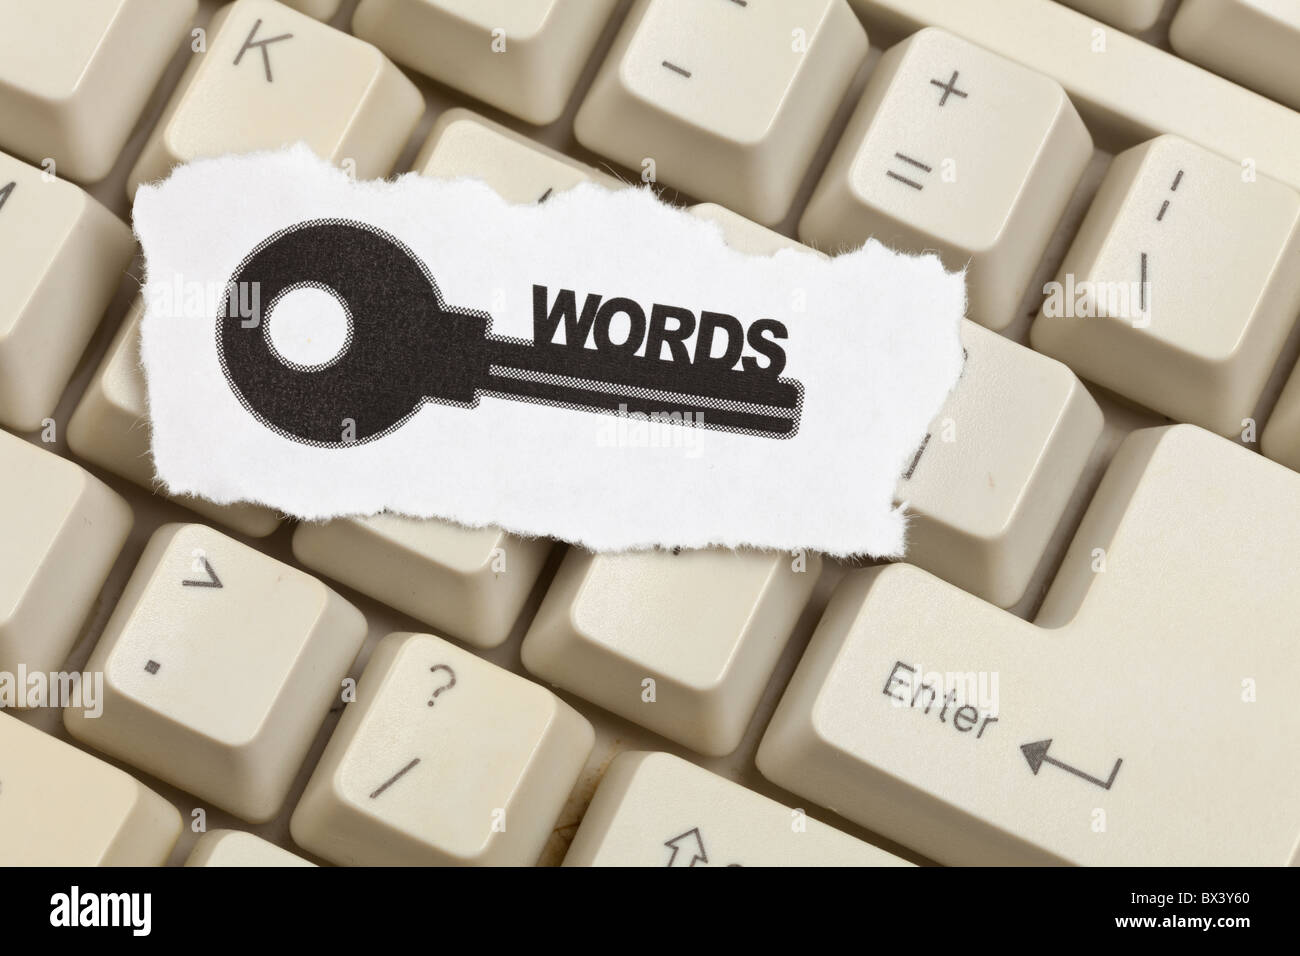 keywords, concept of Internet Searching Stock Photo